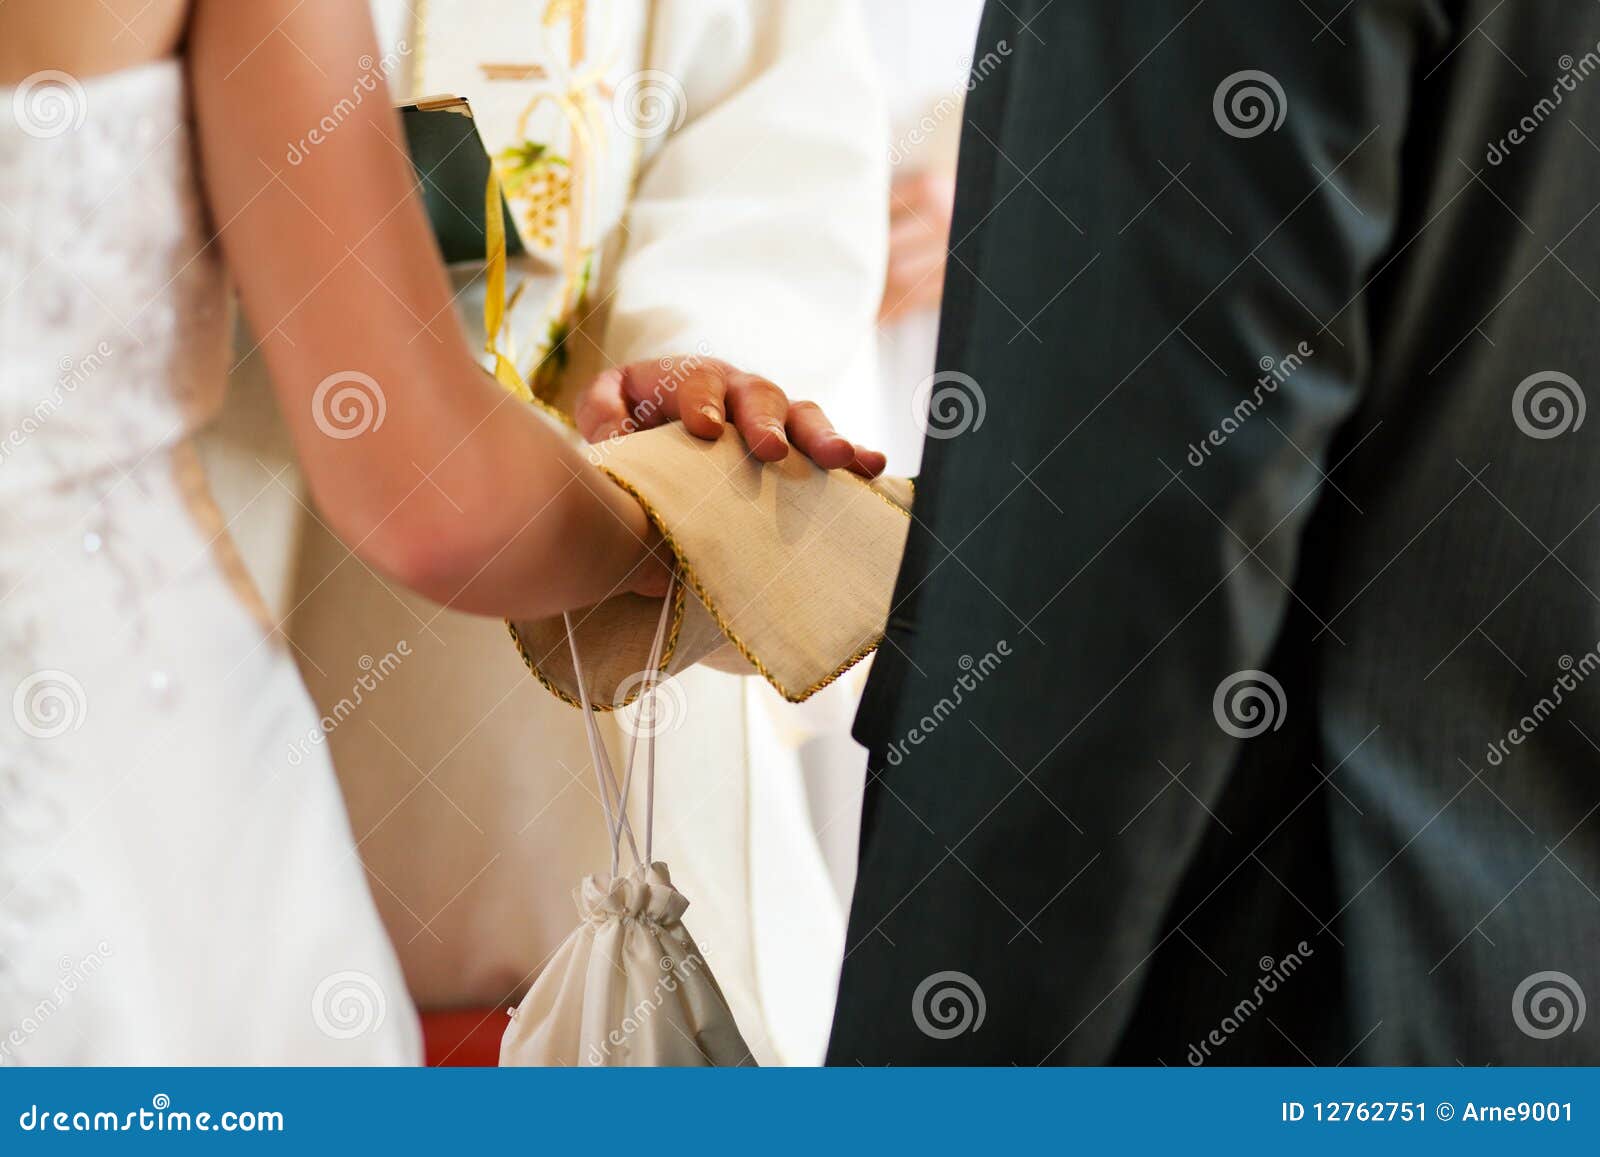 wedding couple receiving blessing from priest